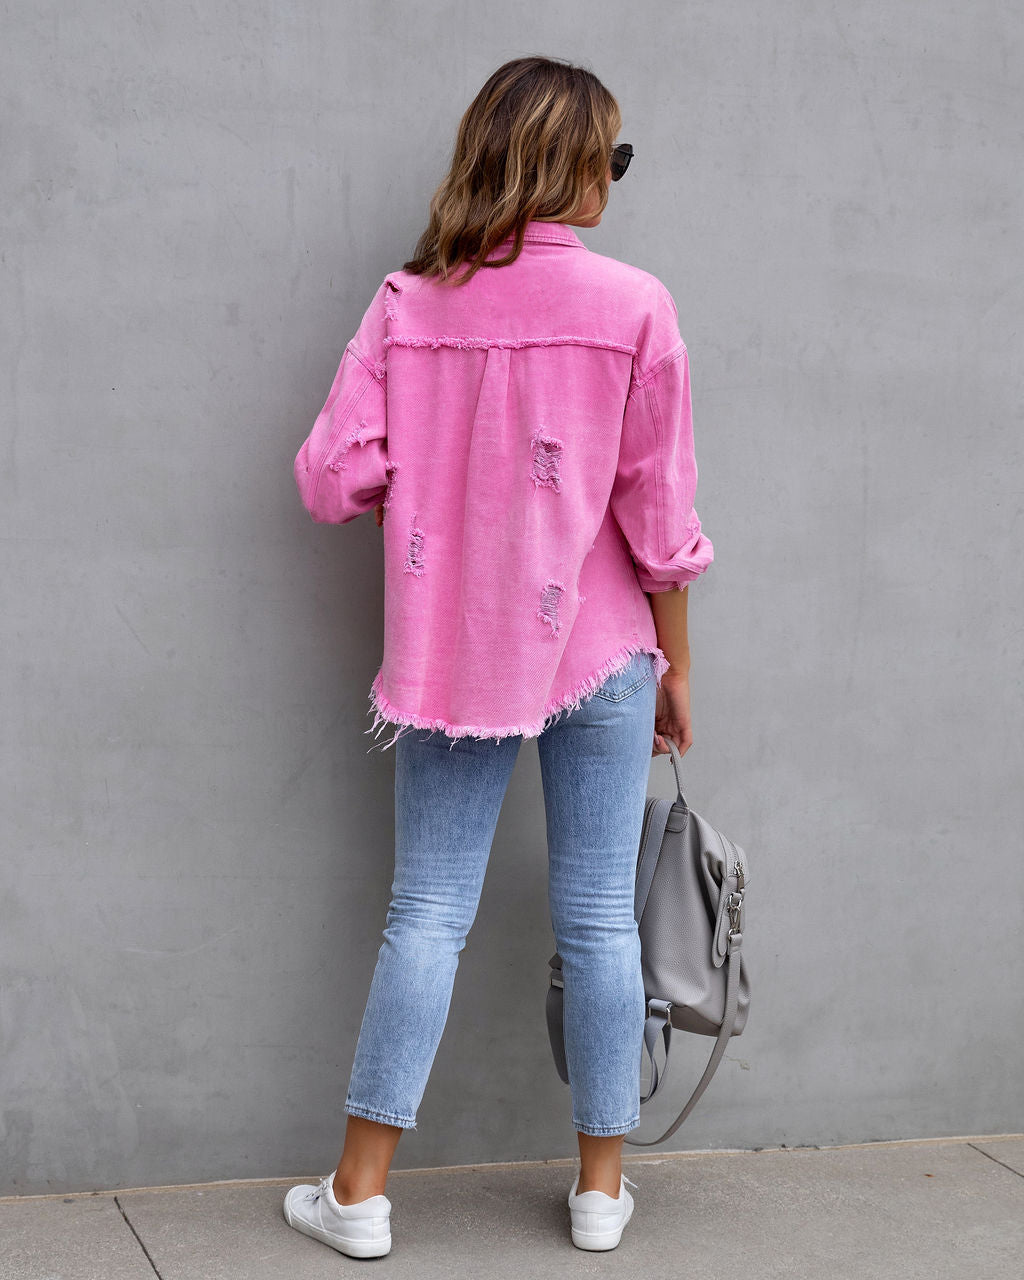 Women’s Jacket - Fashion Ripped Shirt Jacket Female Autumn And Spring Casual Tops Womens Clothing